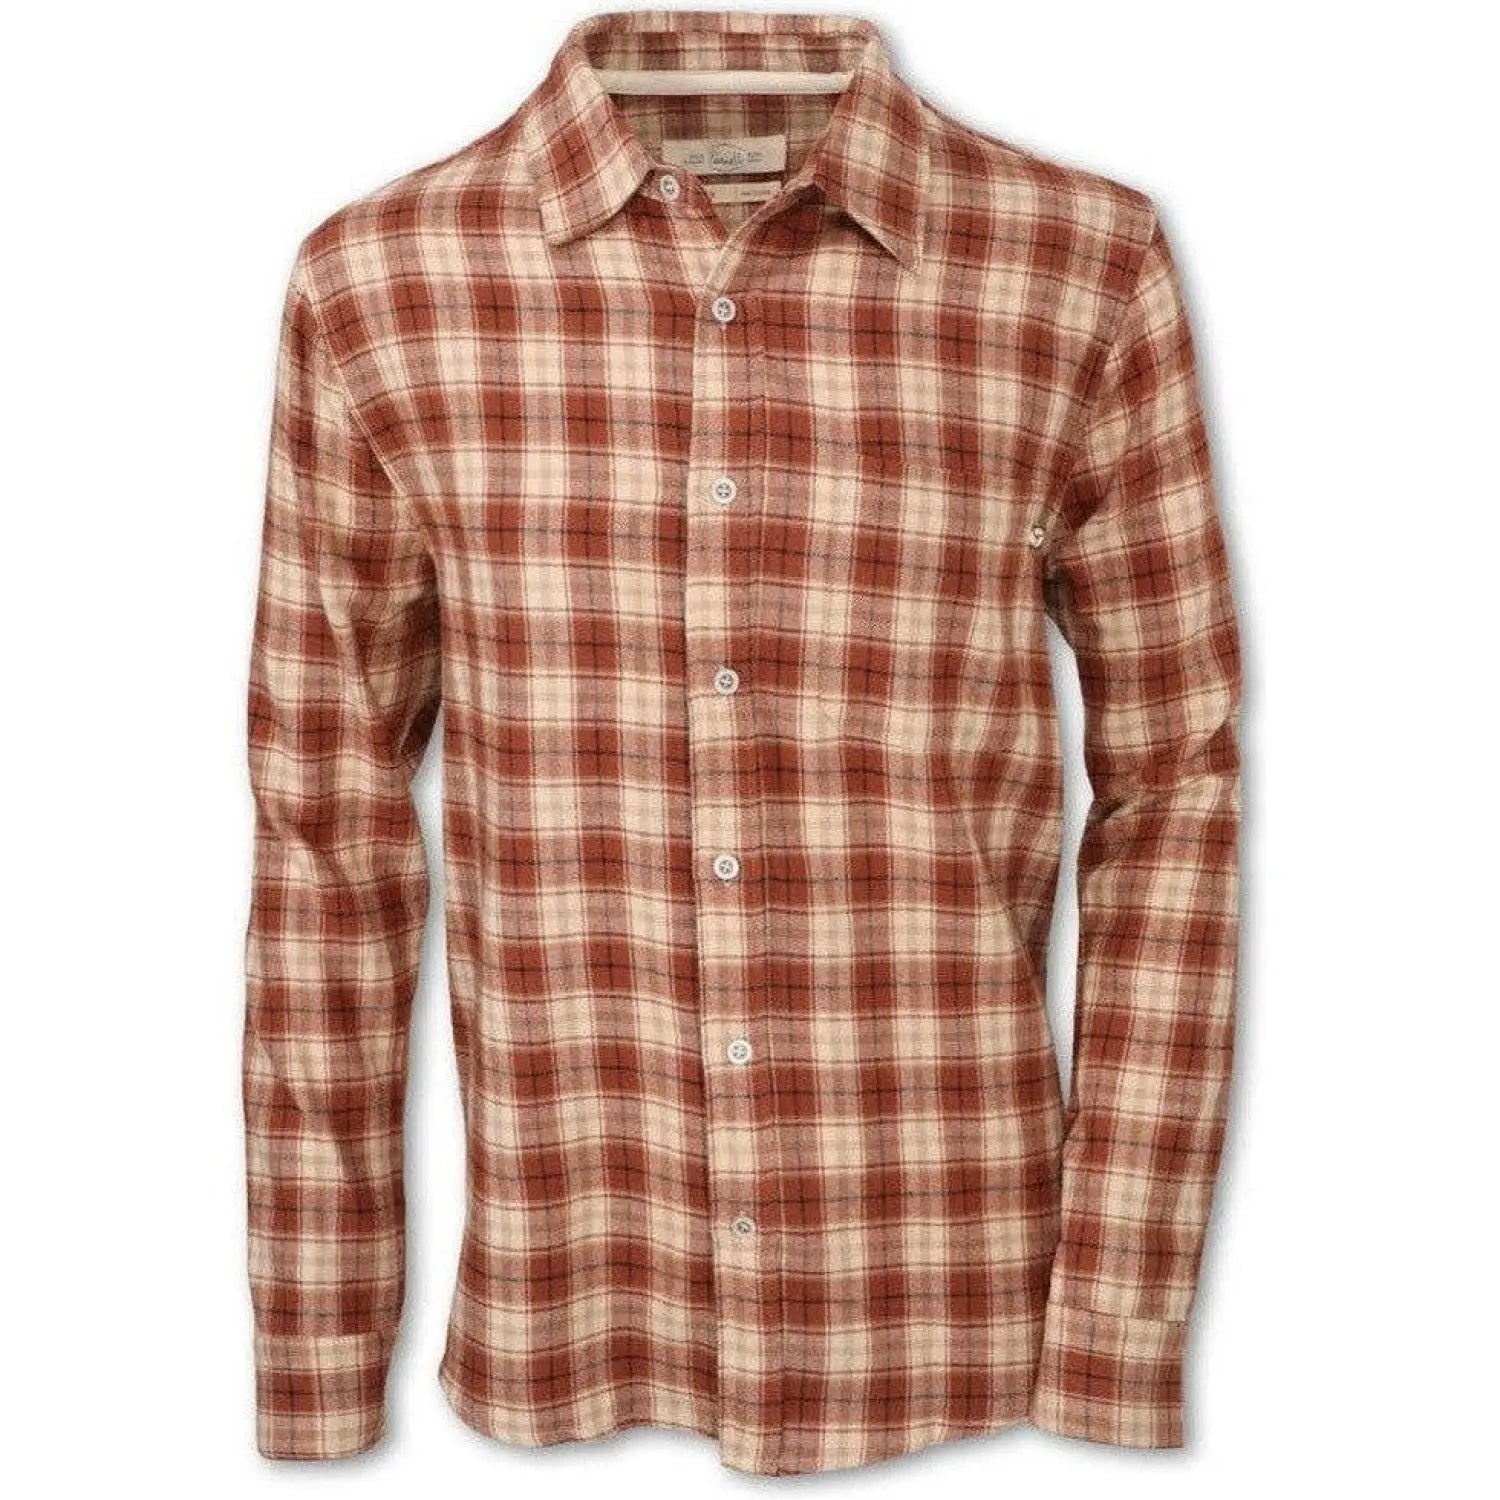 Purnell Men's Flannel shown in the Rust color option. Front view.